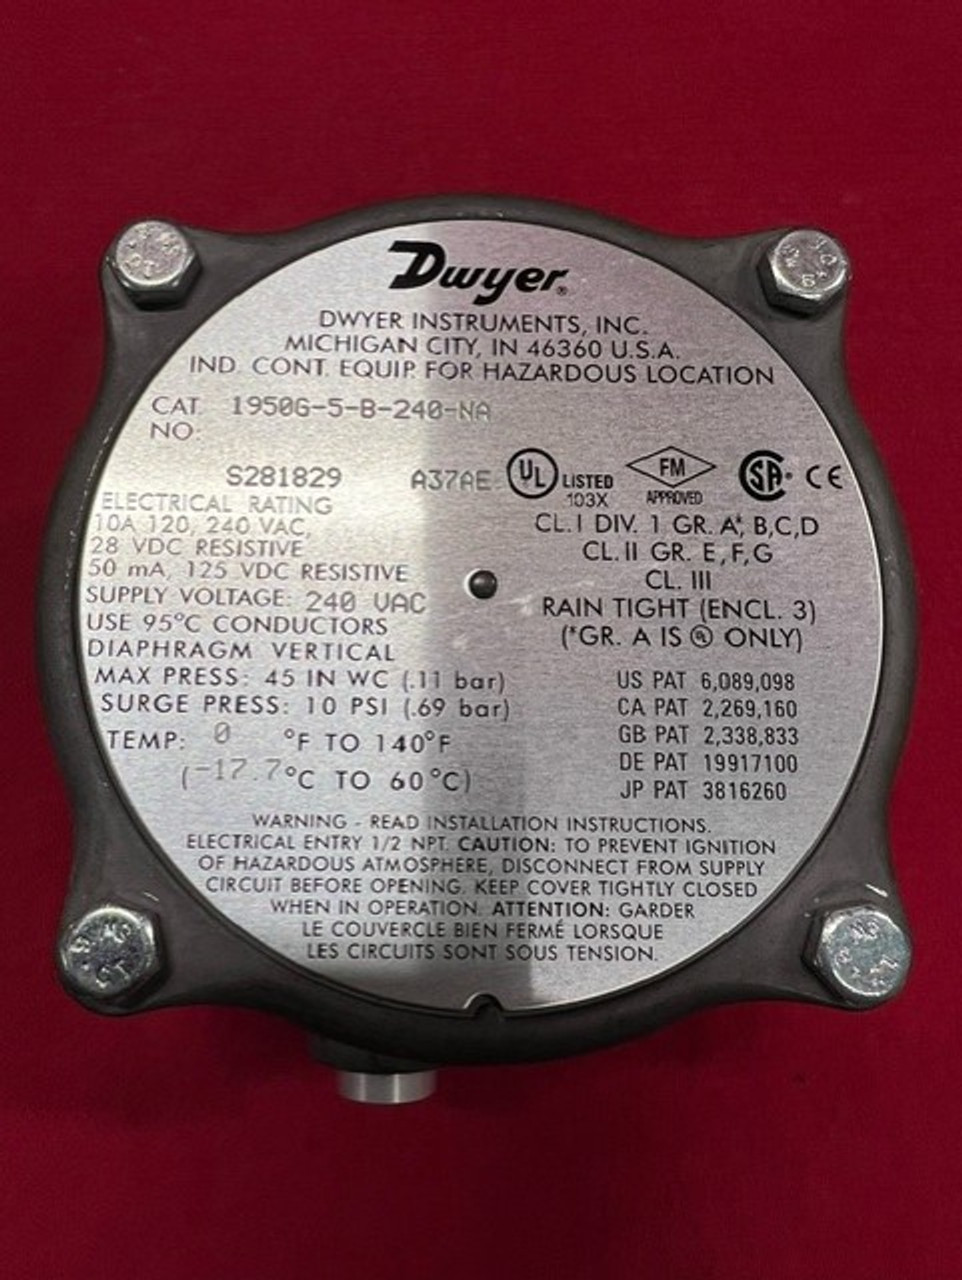 Dwyer Instruments, 1950G-5-B-240-NA, Differential Pressure Switch, Explosion Proof, 1.4-.55" W.C.